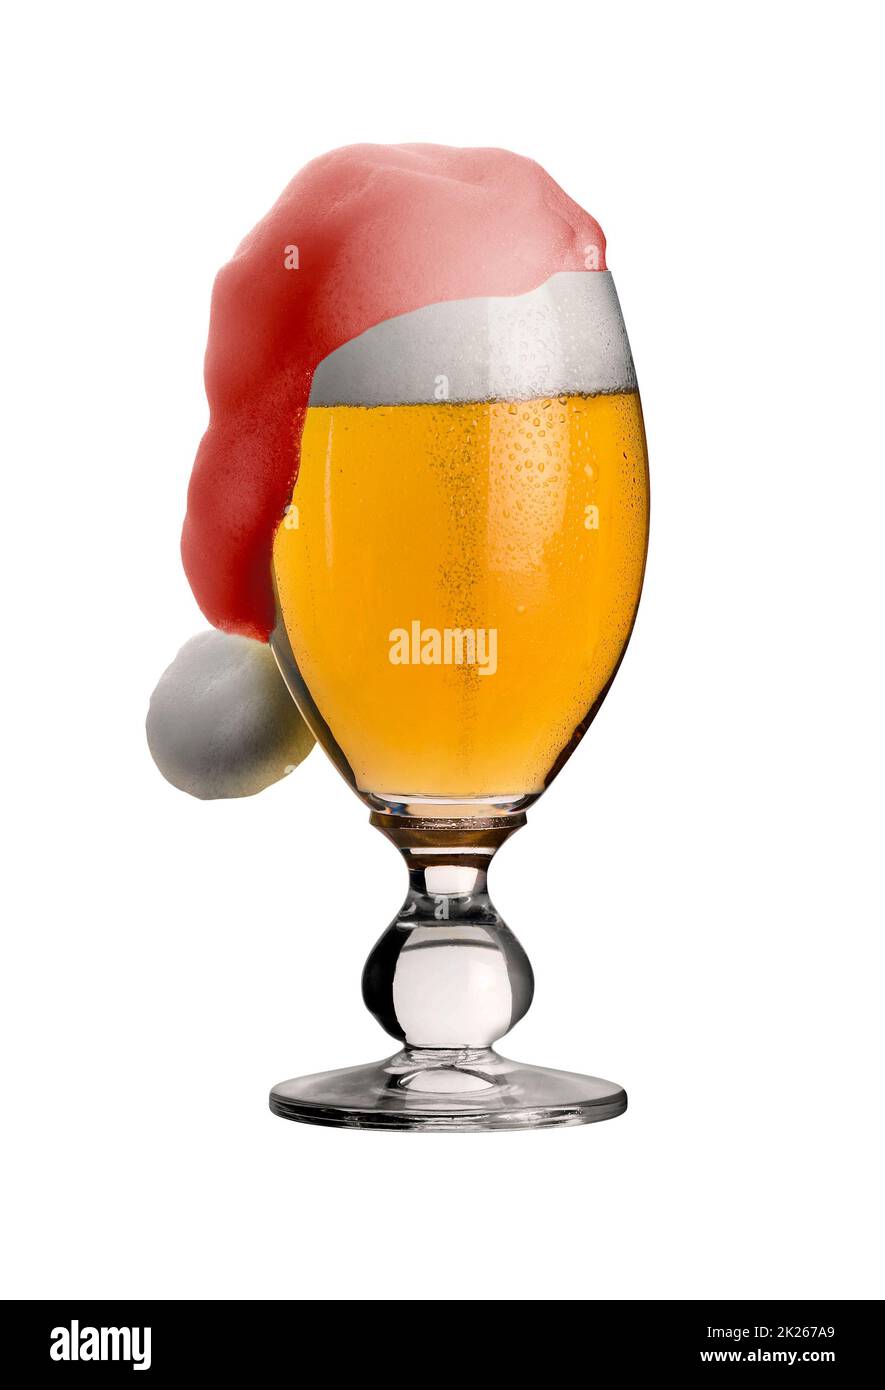 studio photography showing a glass of pils beer with funny foam shaped like a jelly bag cap in white back Stock Photo